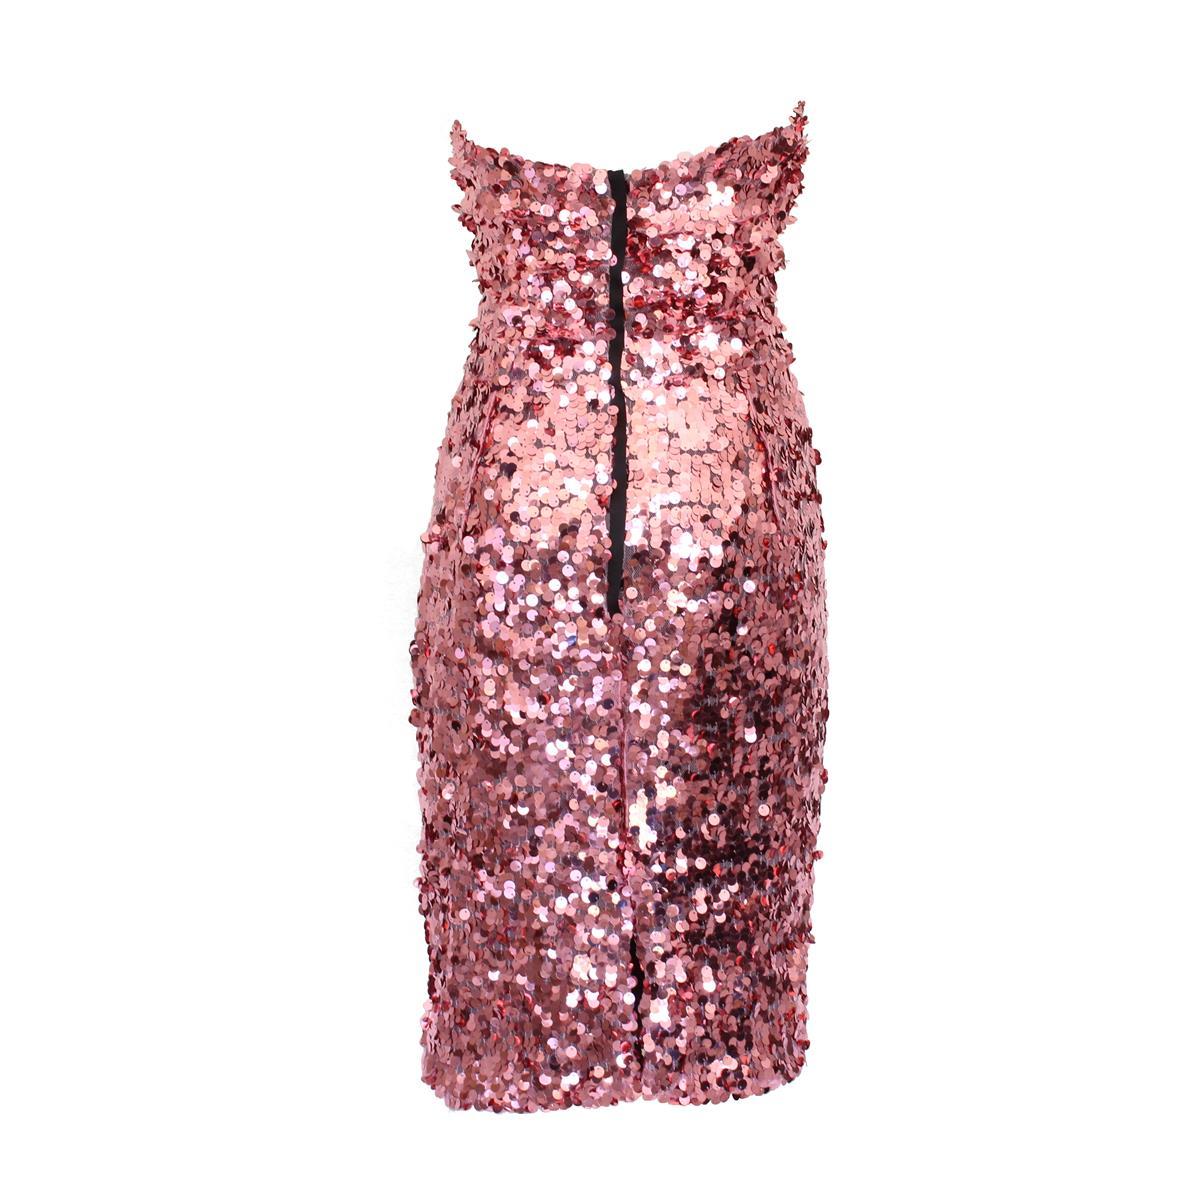 Magnificent sequins cocktail dress by Dolce & Gabbana
Pink color
Silk lining
Back zip
Total lenght cm 82 (32.2 inches)
Original price € 2000
Worldwide express shipping included in the price !